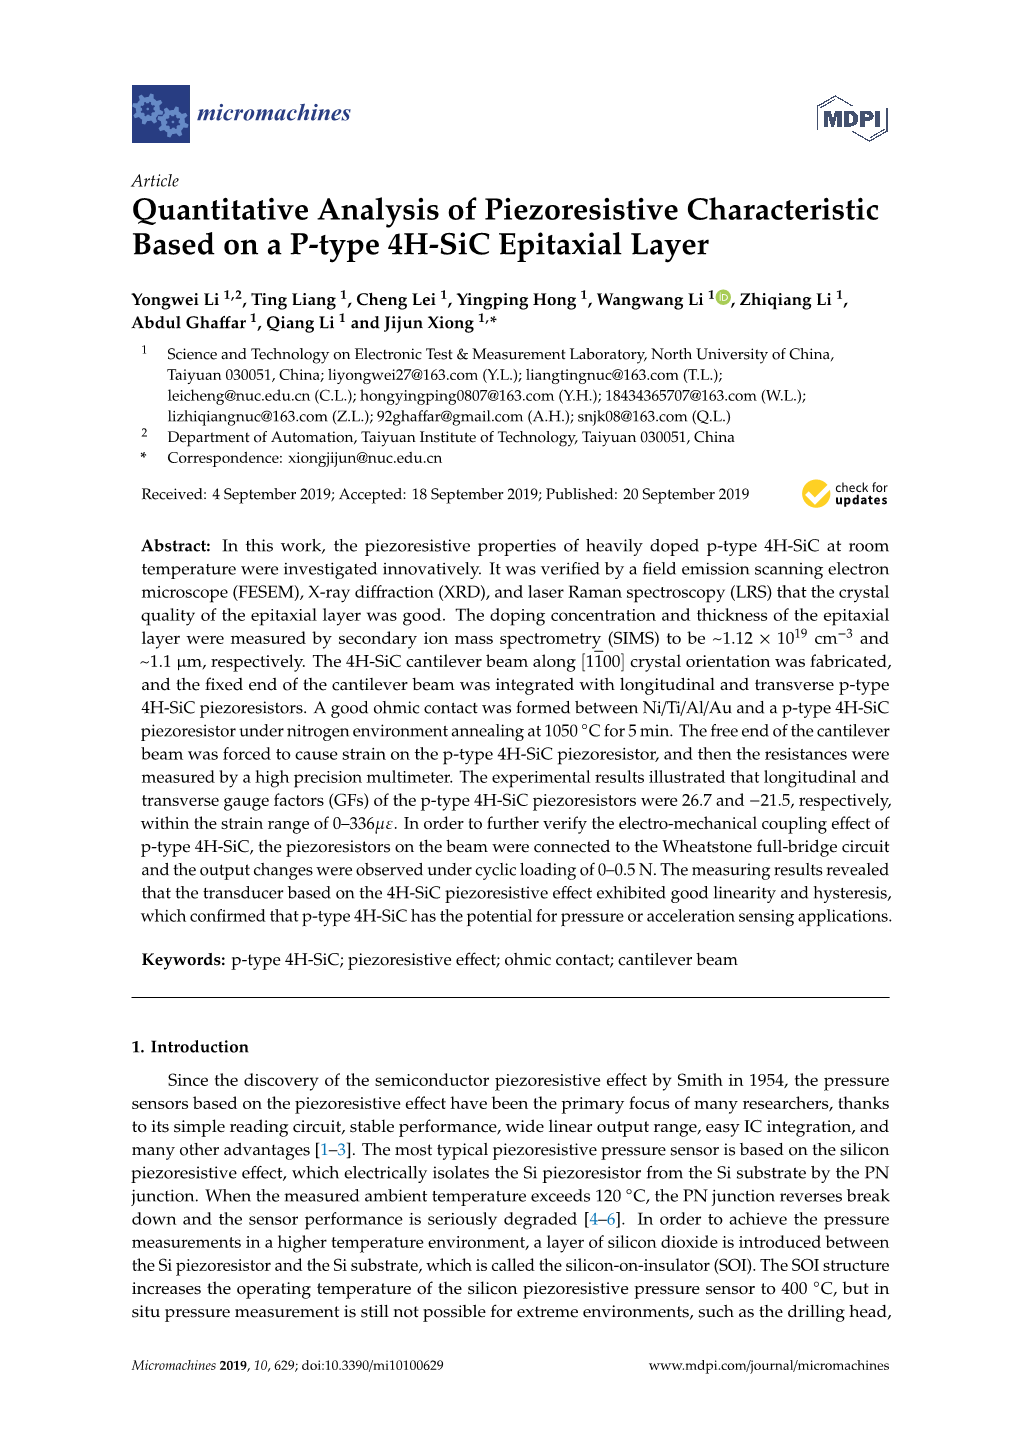 Quantitative Analysis of Piezoresistive Characteristic Based on a P-Type 4H-Sic Epitaxial Layer